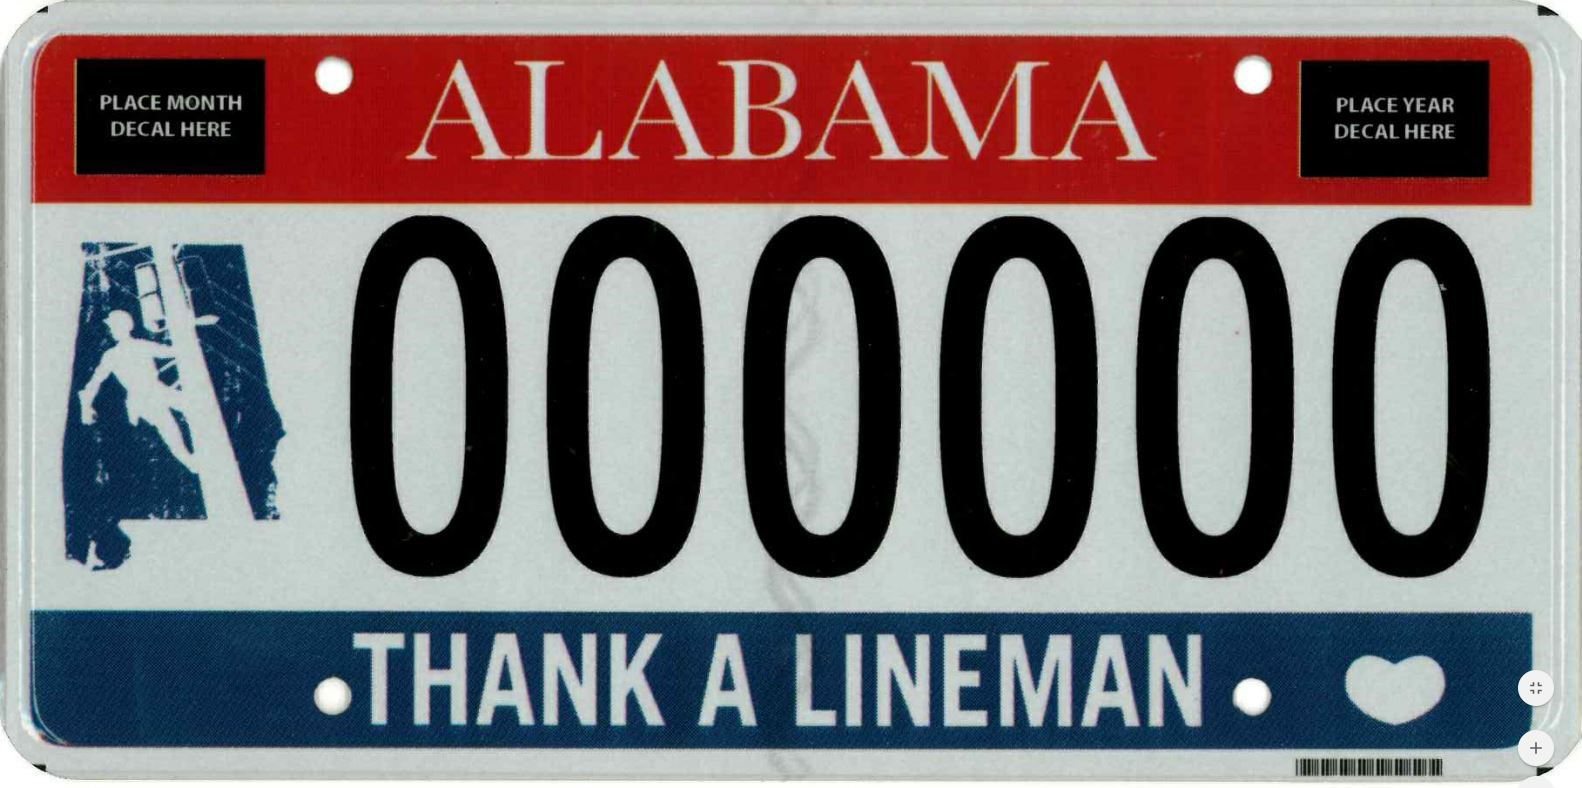 Alabama’s ‘Thank A Lineman’ License Plate Has a Coop Pedigree